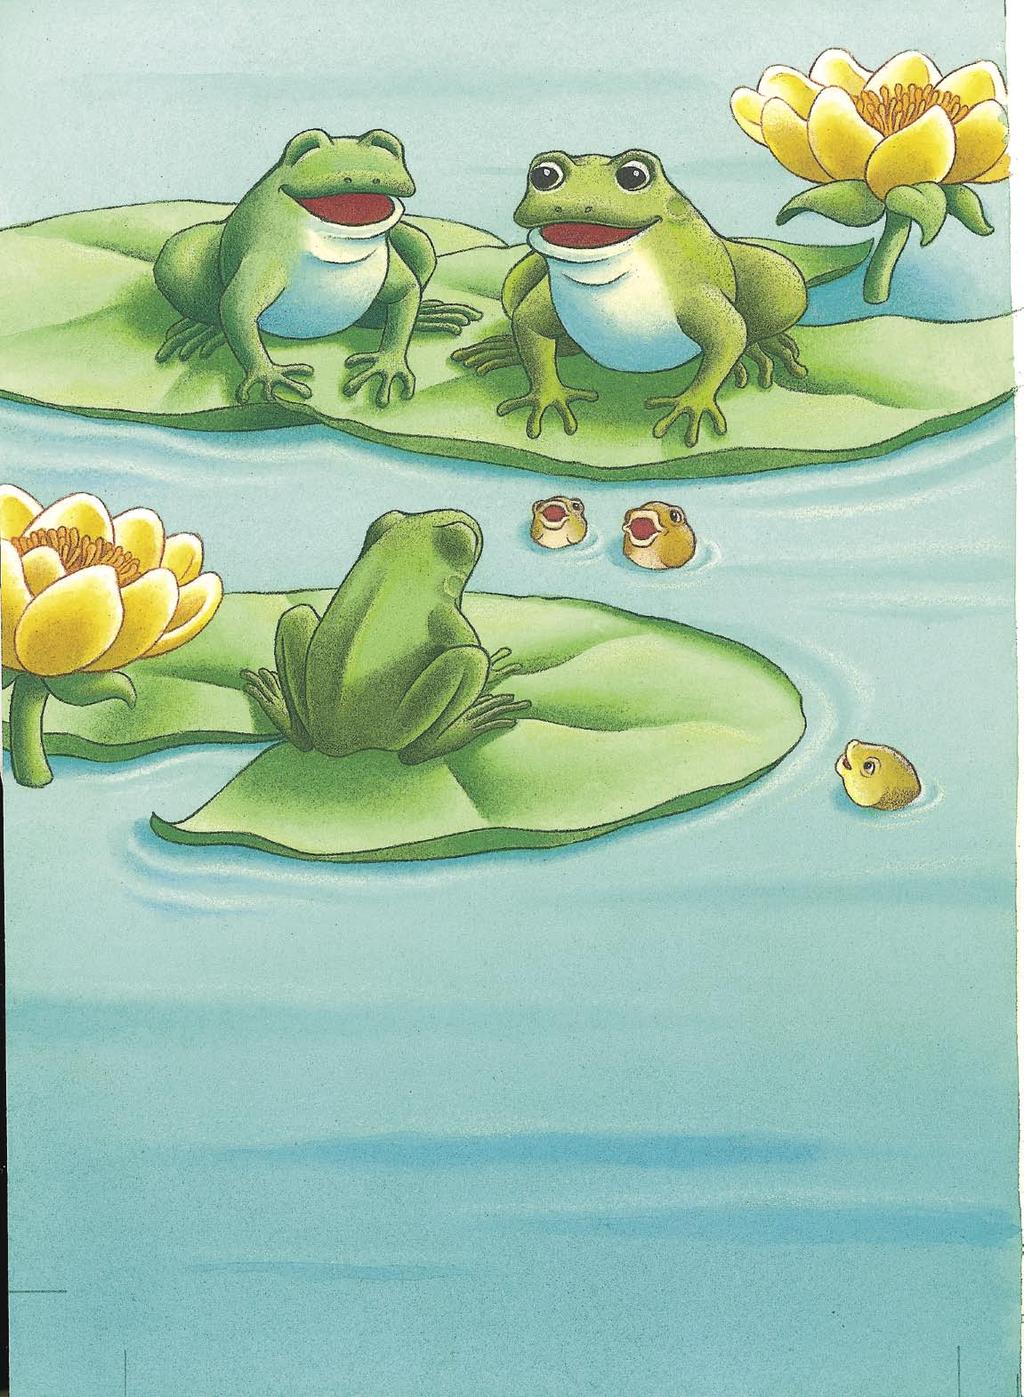 Then Tombo realized that he was now the smallest, the slowest, and the weakest frog in the pond. He felt ashamed for the way he had treated his friends.